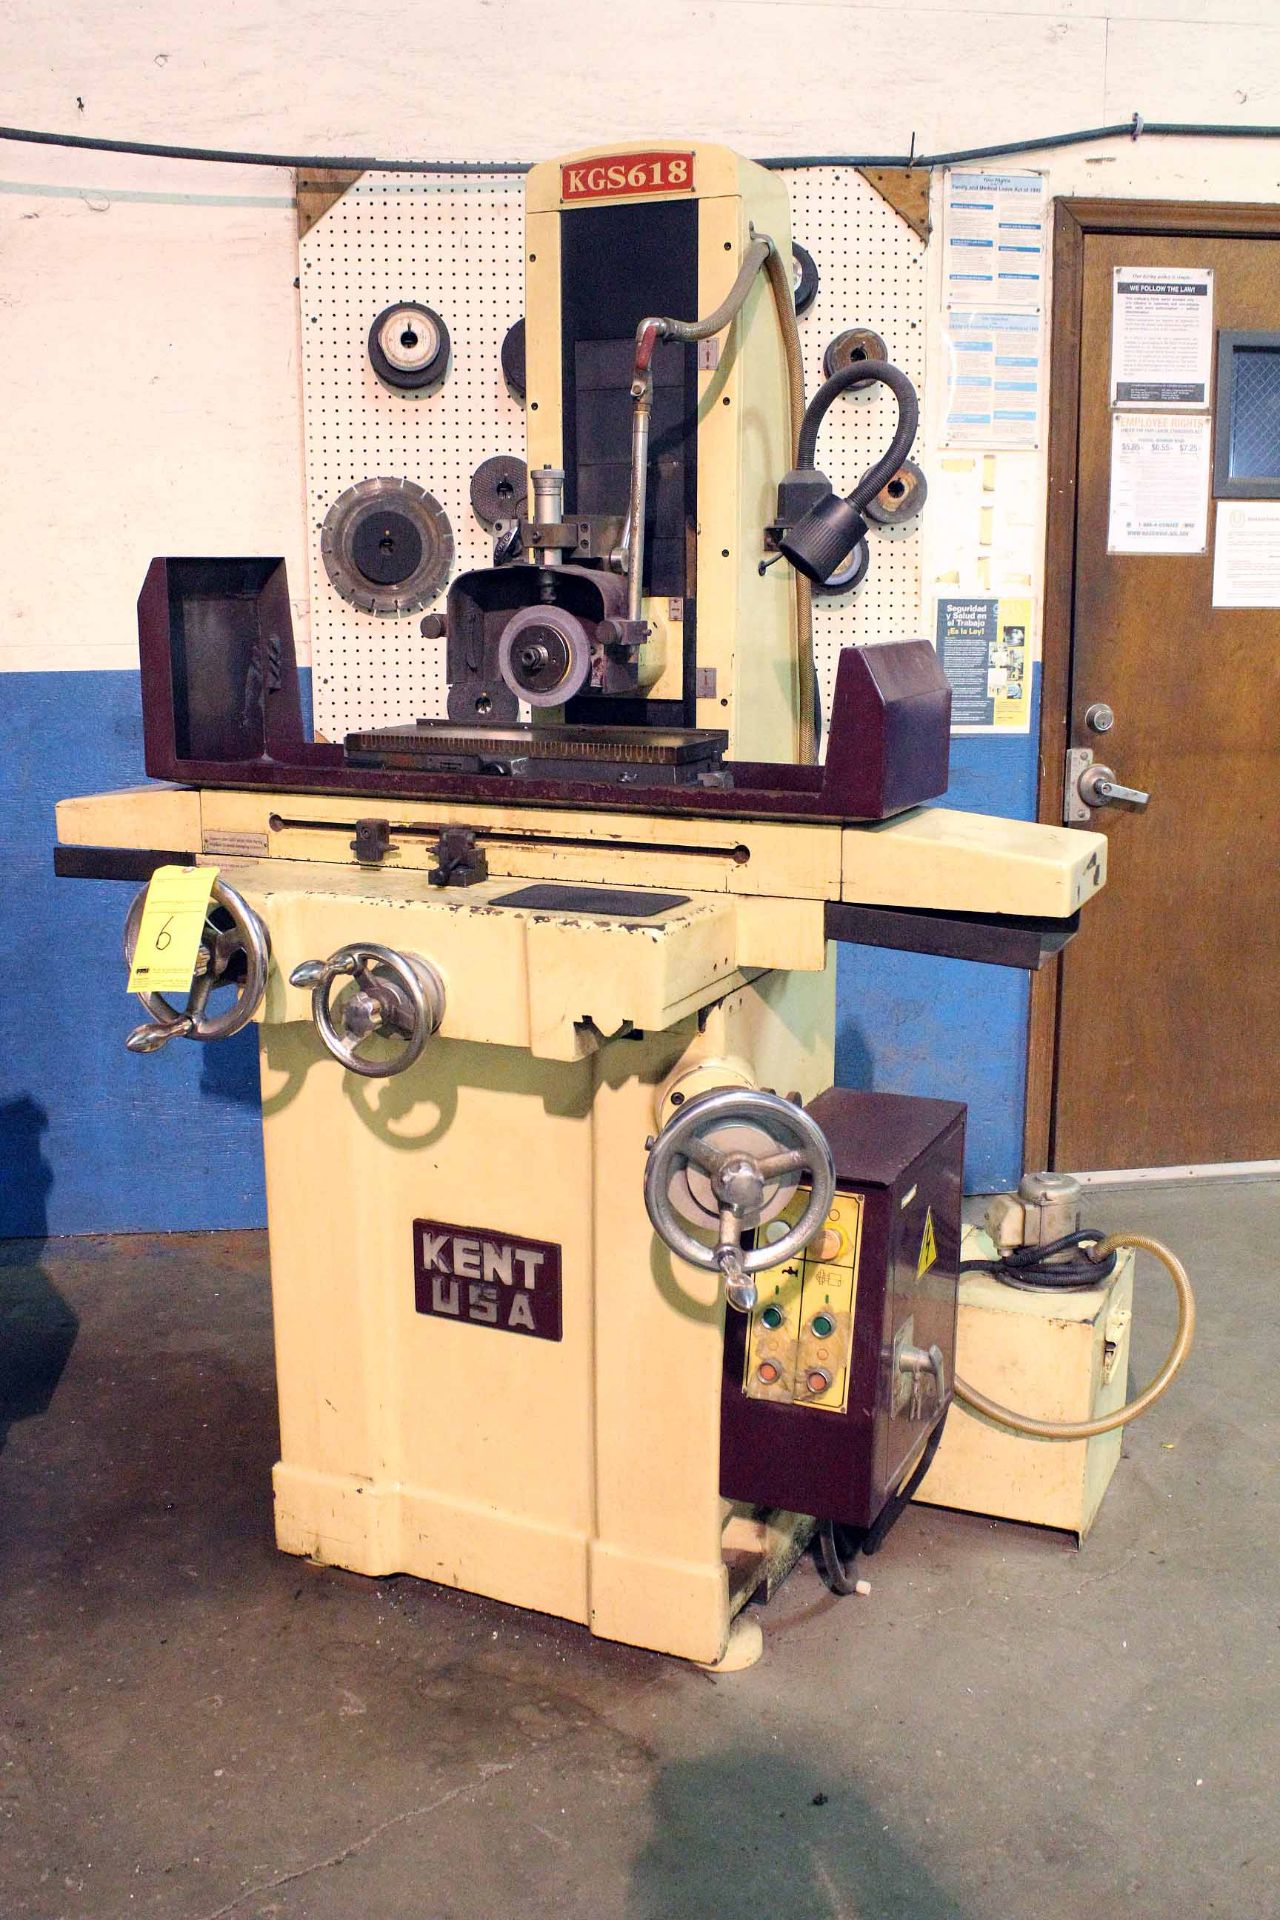 HAND FEED SURFACE GRINDER, KENT 6" X 18" MDL. KGS618, new 12/2003, perm. magnetic chuck, coolant